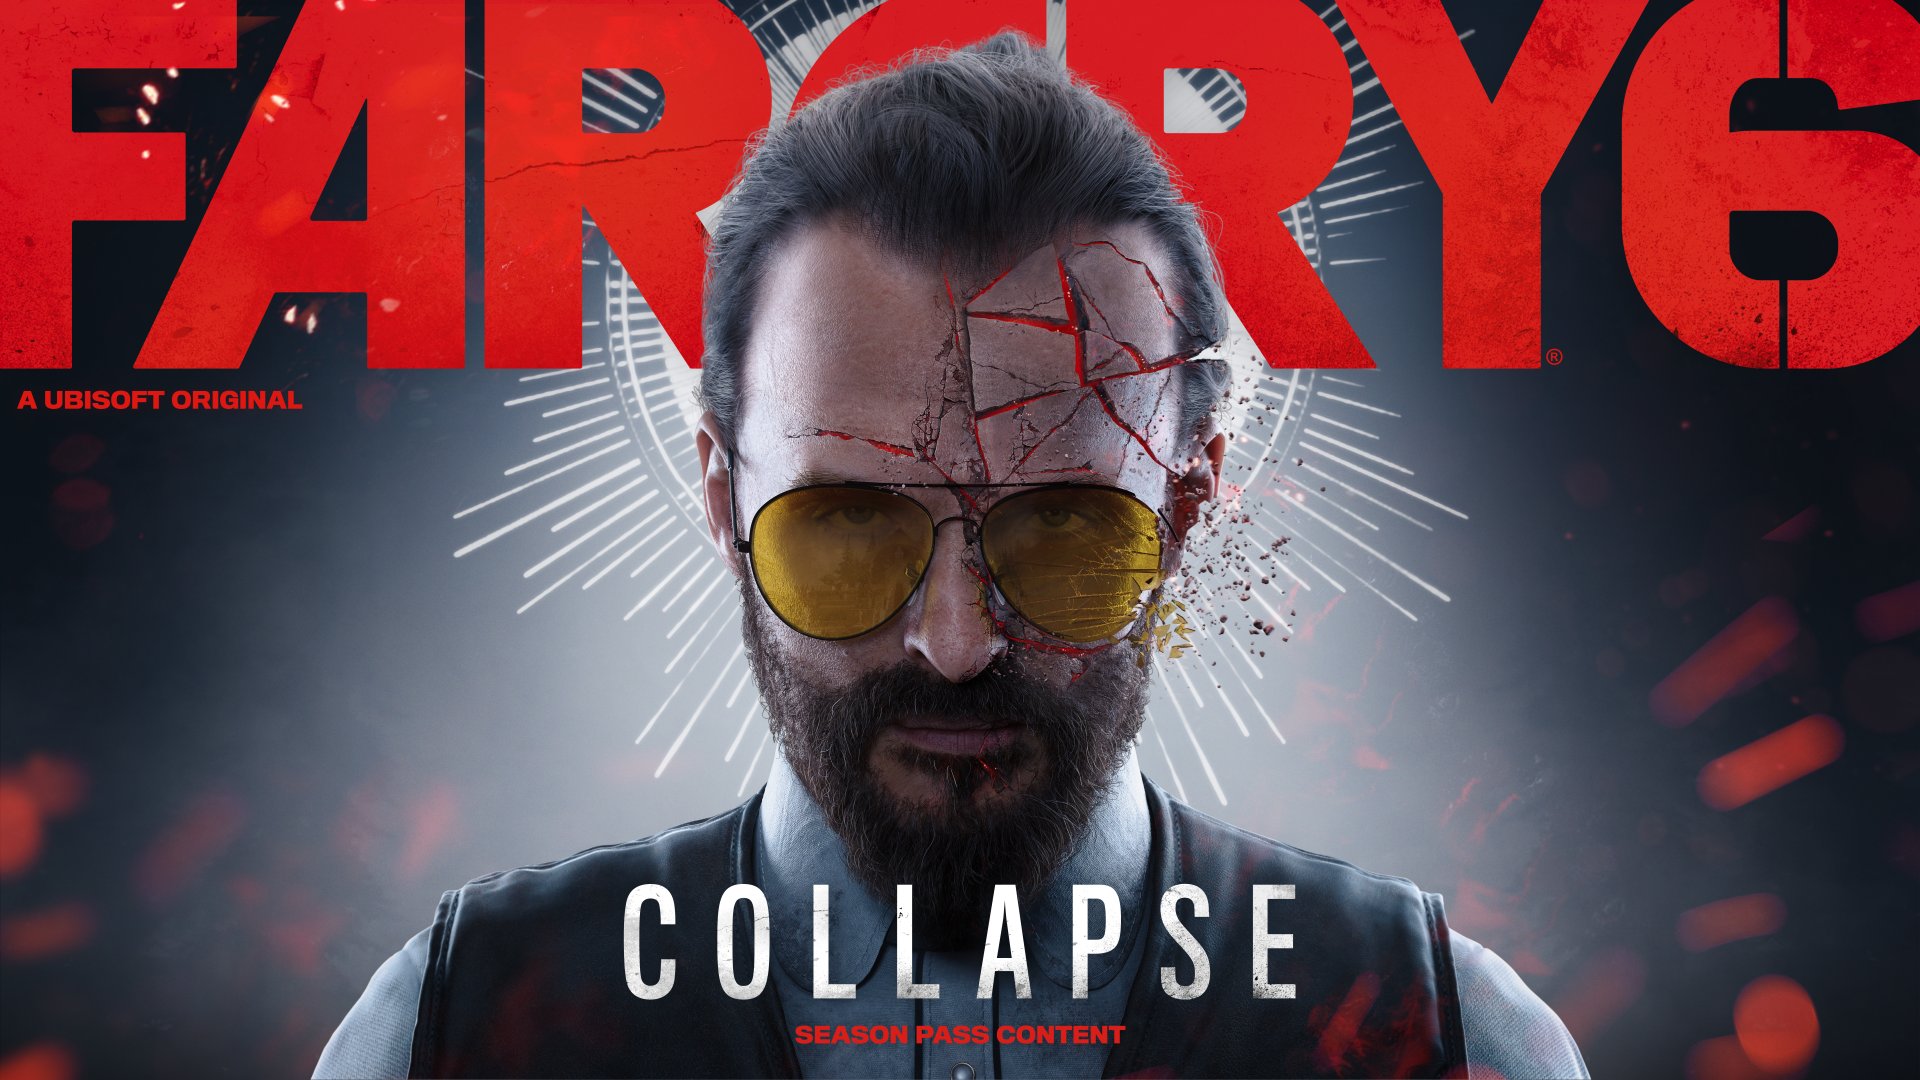 Tap Into The Mind Of A Cult Leader In Far Cry S Joseph Collapse DLC Xbox Video Games Market